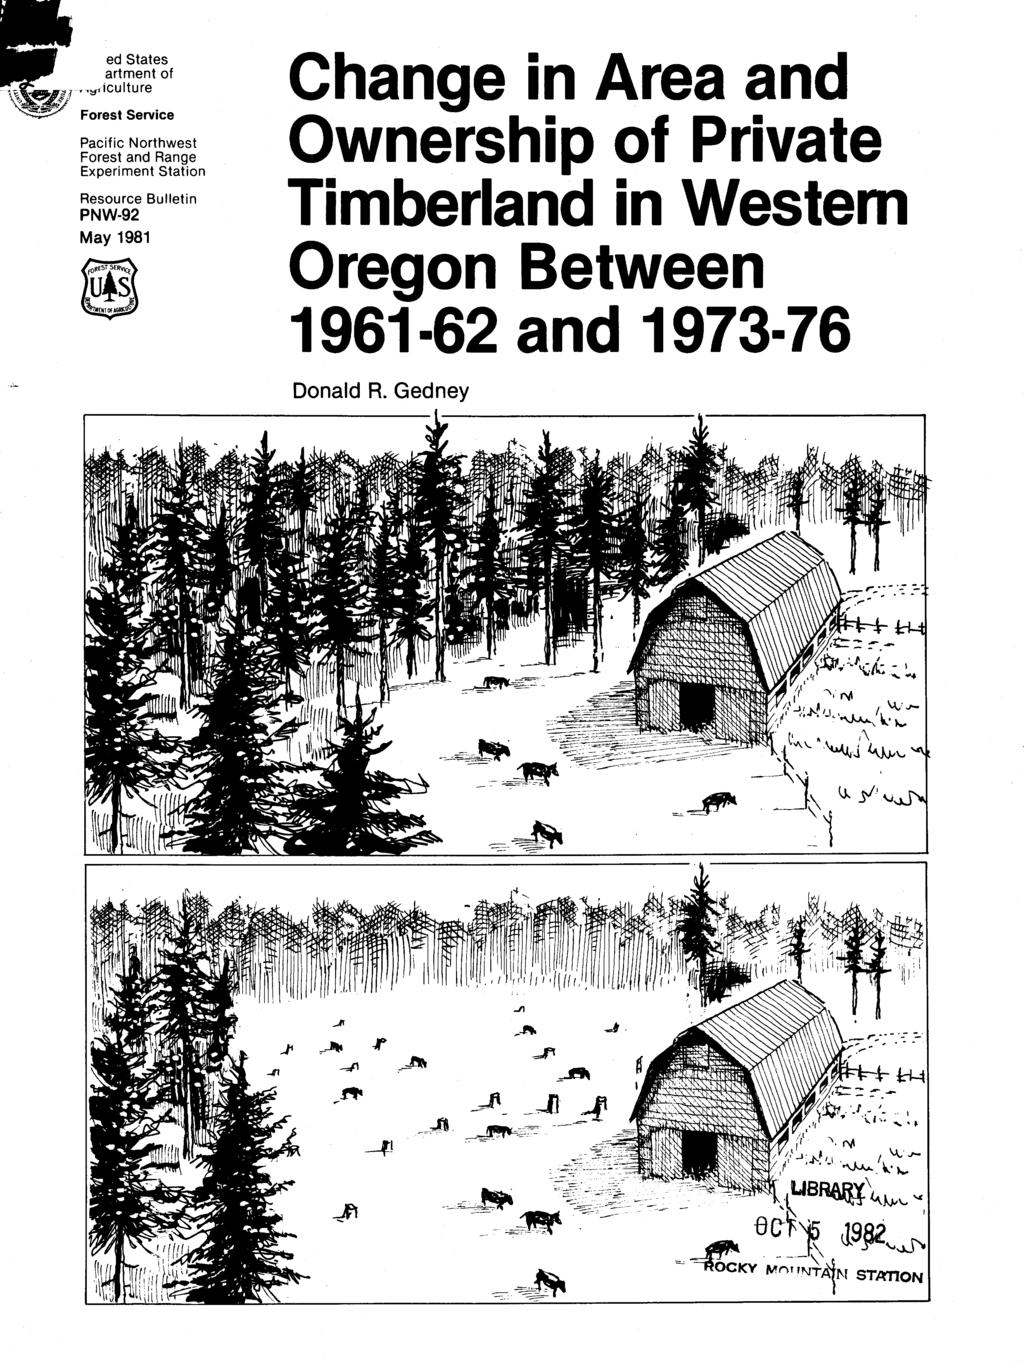 ed States artment of culture Forest Service Pacific Northwest Forest and Range Experiment Station Resource Bulletin PNW-92